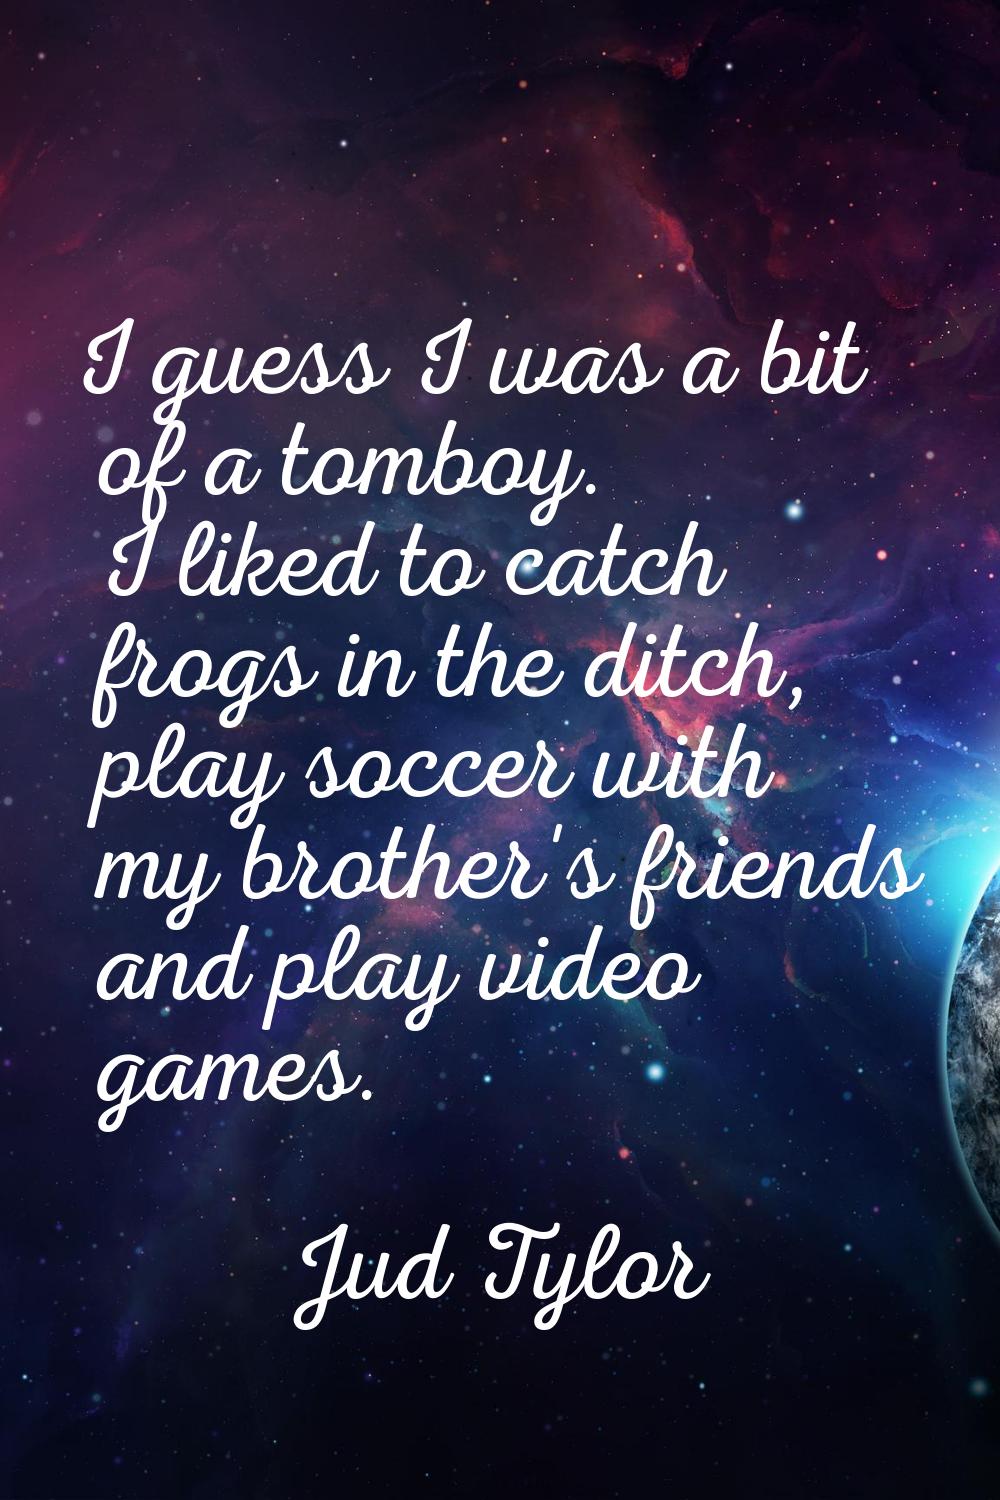 I guess I was a bit of a tomboy. I liked to catch frogs in the ditch, play soccer with my brother's